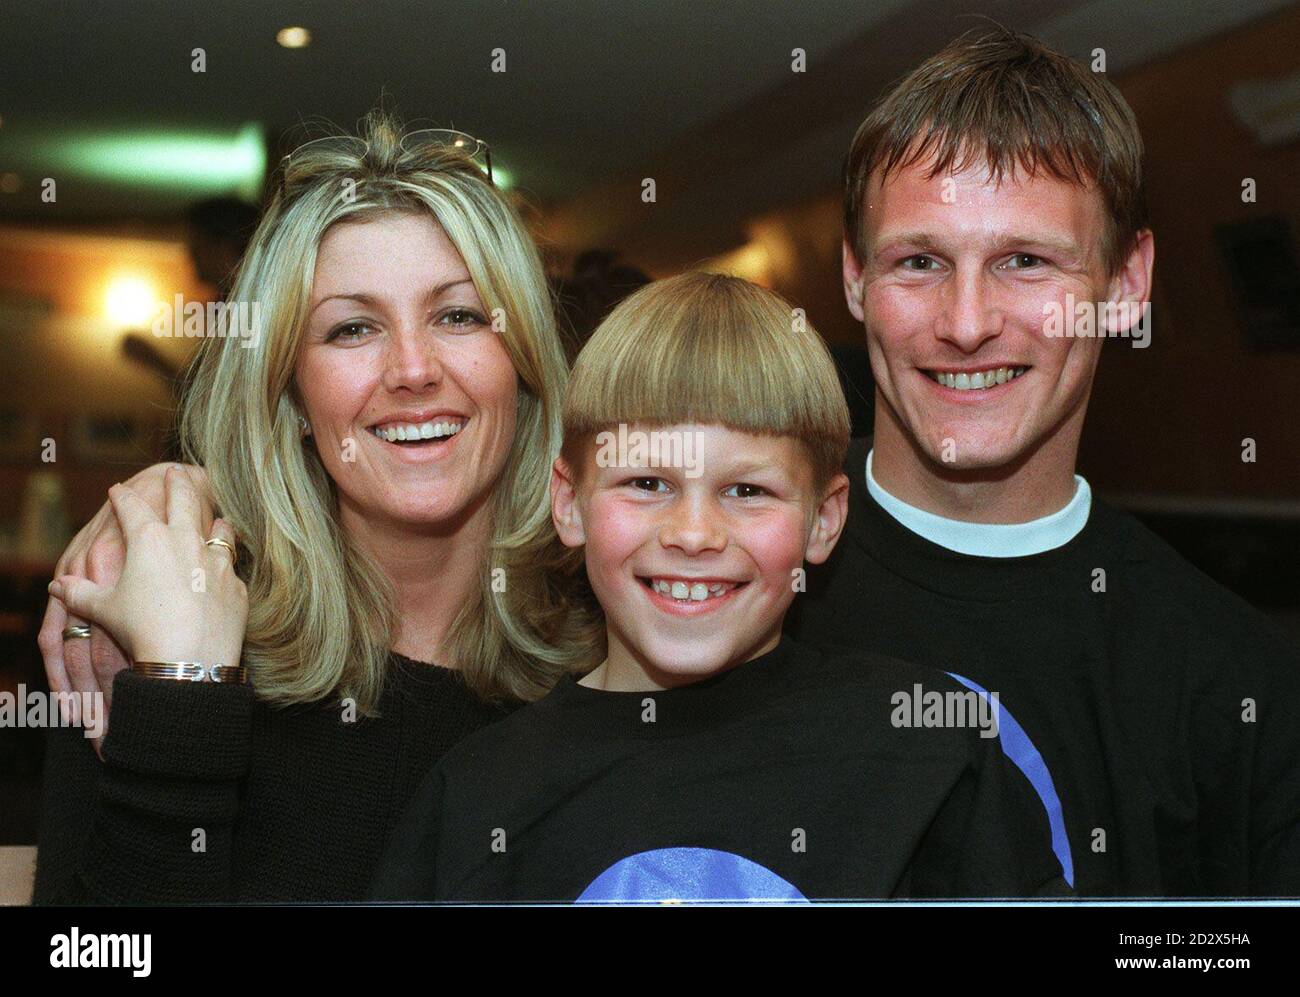 England's Teddy Sheringham, with fiancee Nicola and son Charlie, at London's Football Football restaurant for the launch of the Euro 96 Wireplay Challenge, a new football computer release from BT, which is set to stage a virtual match over the network that could predict the outcome of the real tournament.  Stock Photo